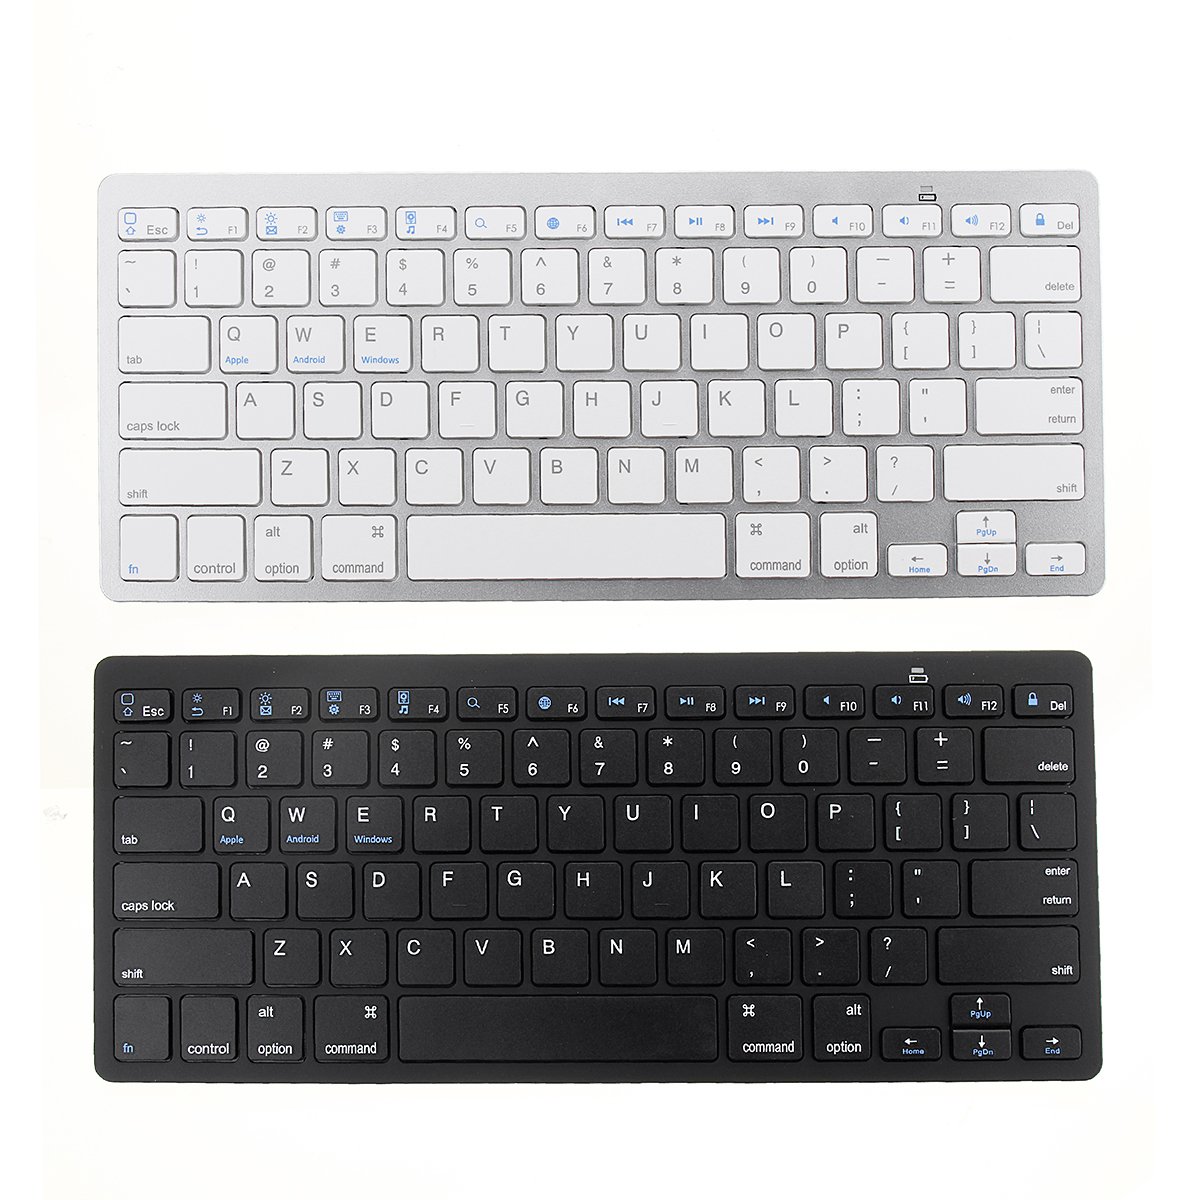 Wirelss bluetooth 3.0 Keyboard For iPhone iPad Macbook Samsung Tablet PC iOS Android Devices 1